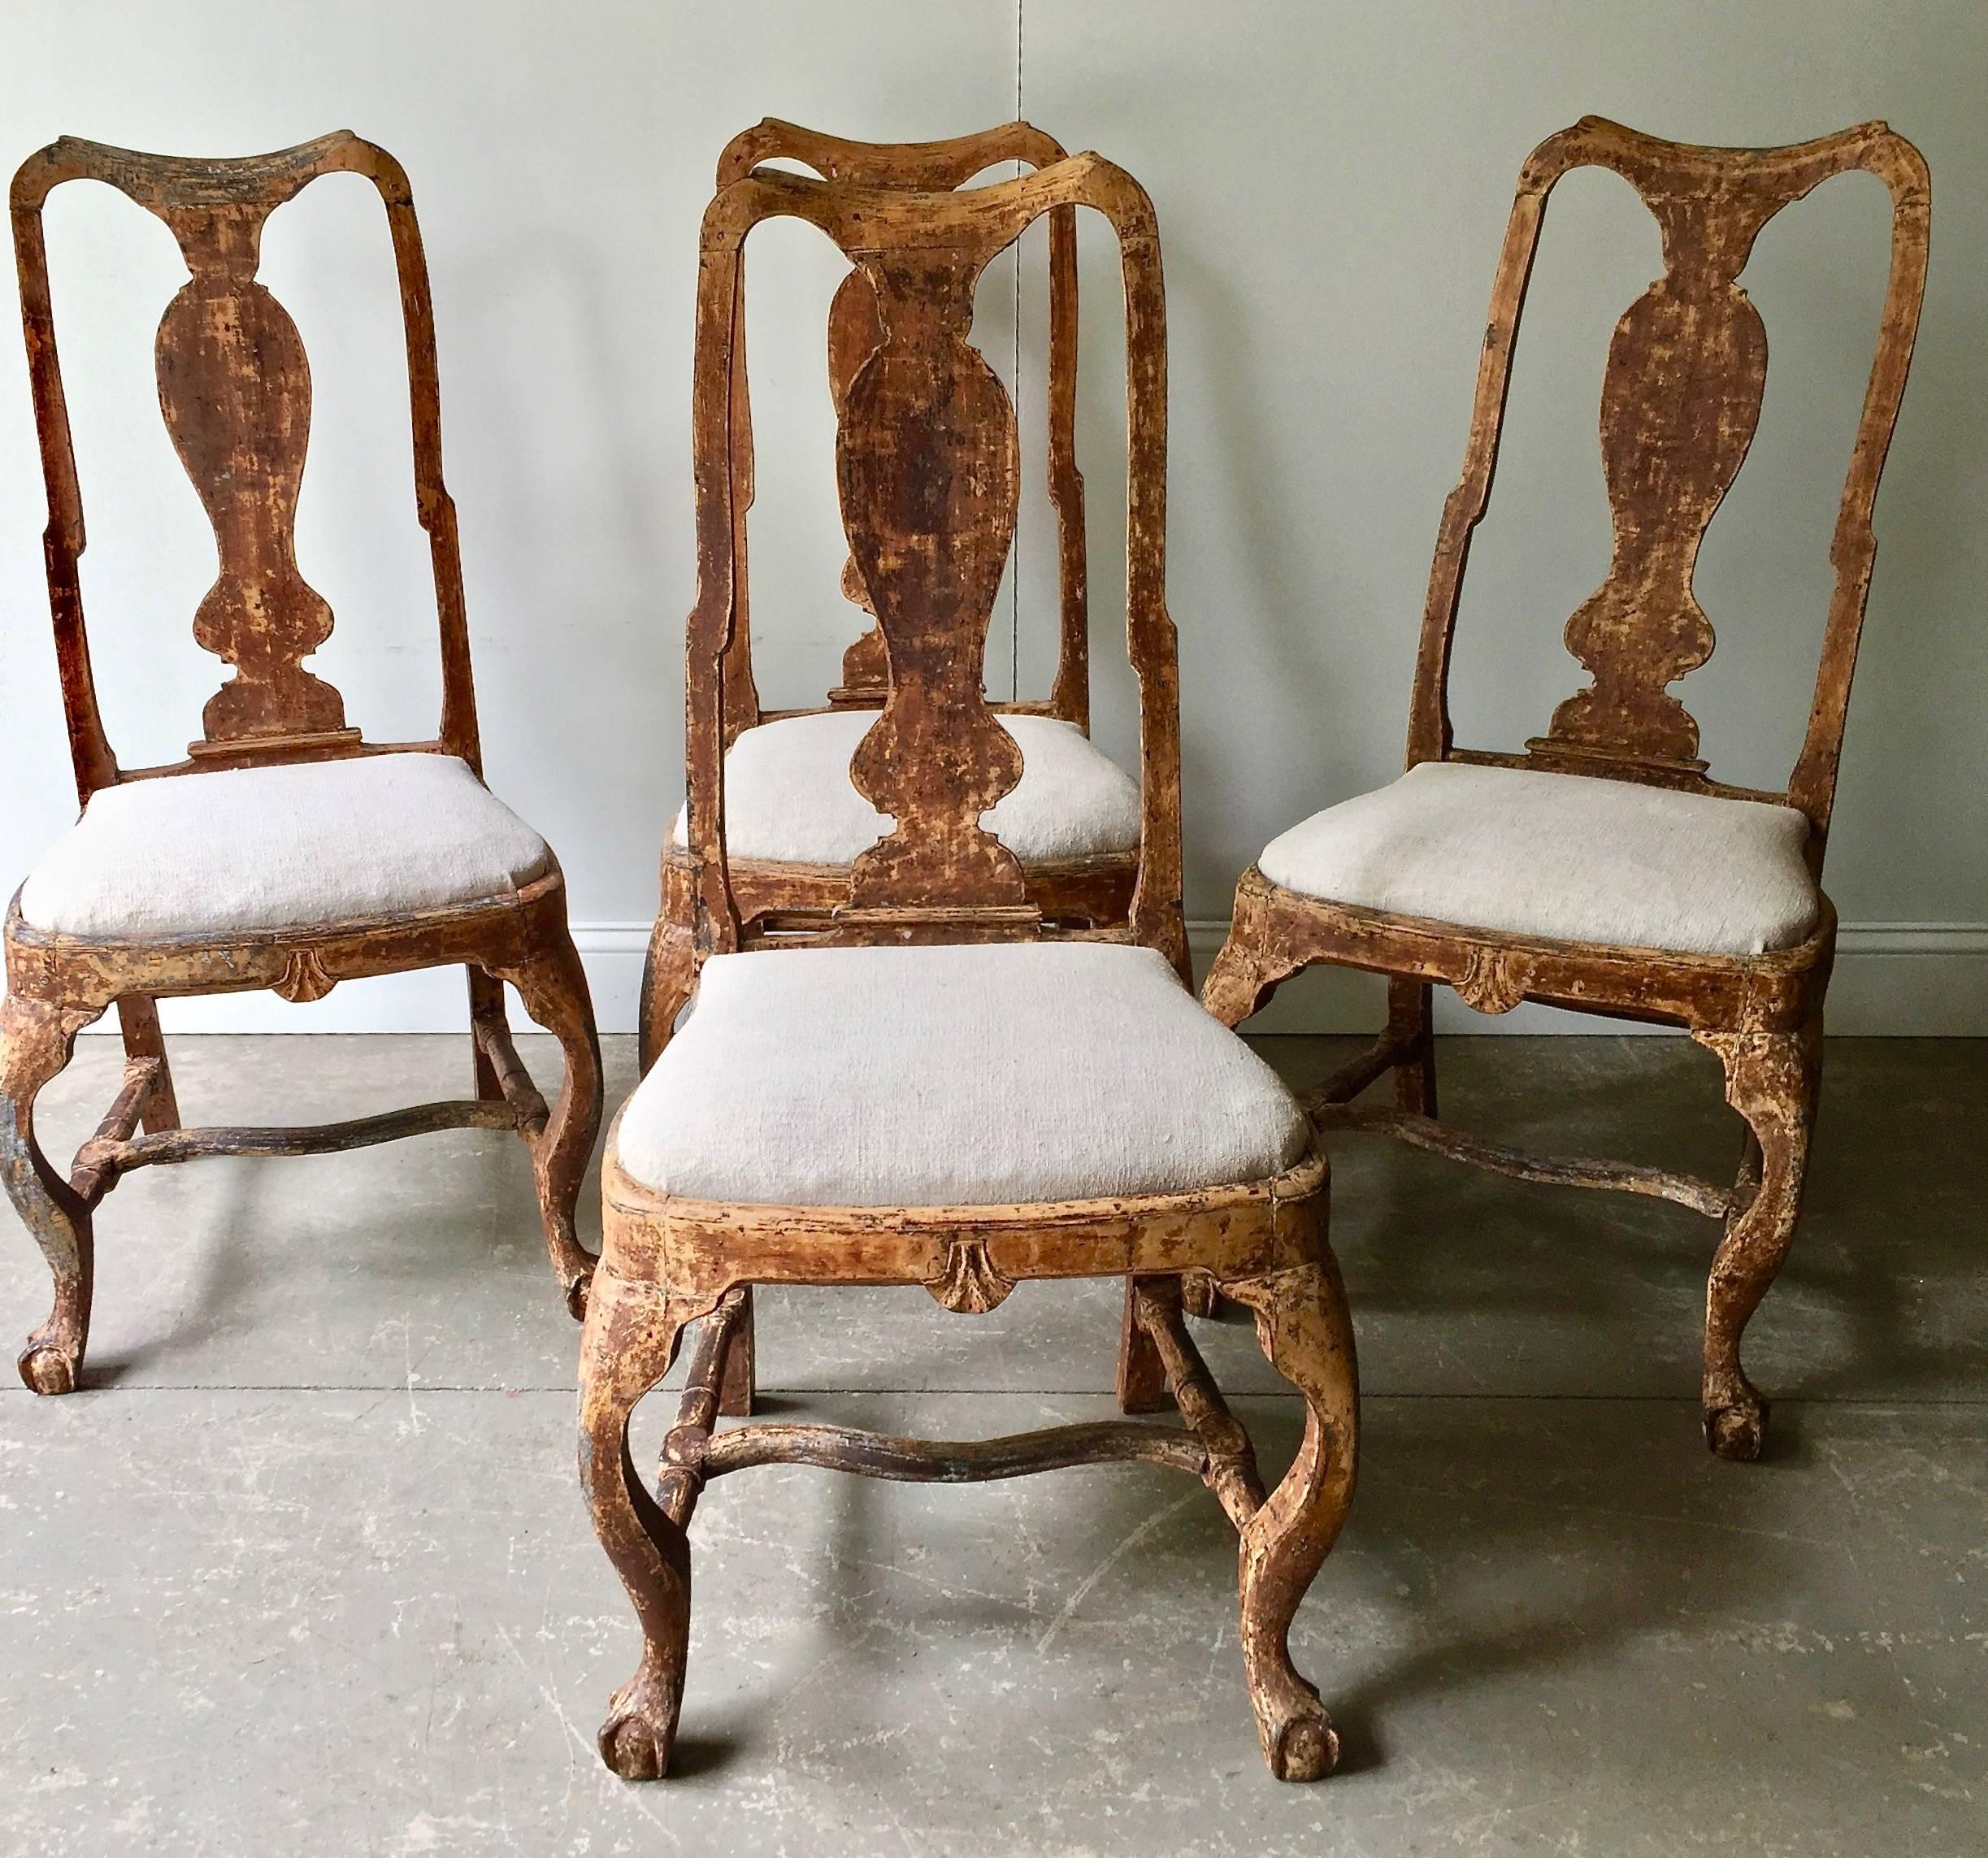 Set of four handsome 18th Century Swedish chairs in Rococo period, circa 1760. Lovingly handmade with richly carving in traces of their original worn patina. Upholstered with antique raw linen. Very elegant chairs, look fantastic with the antique